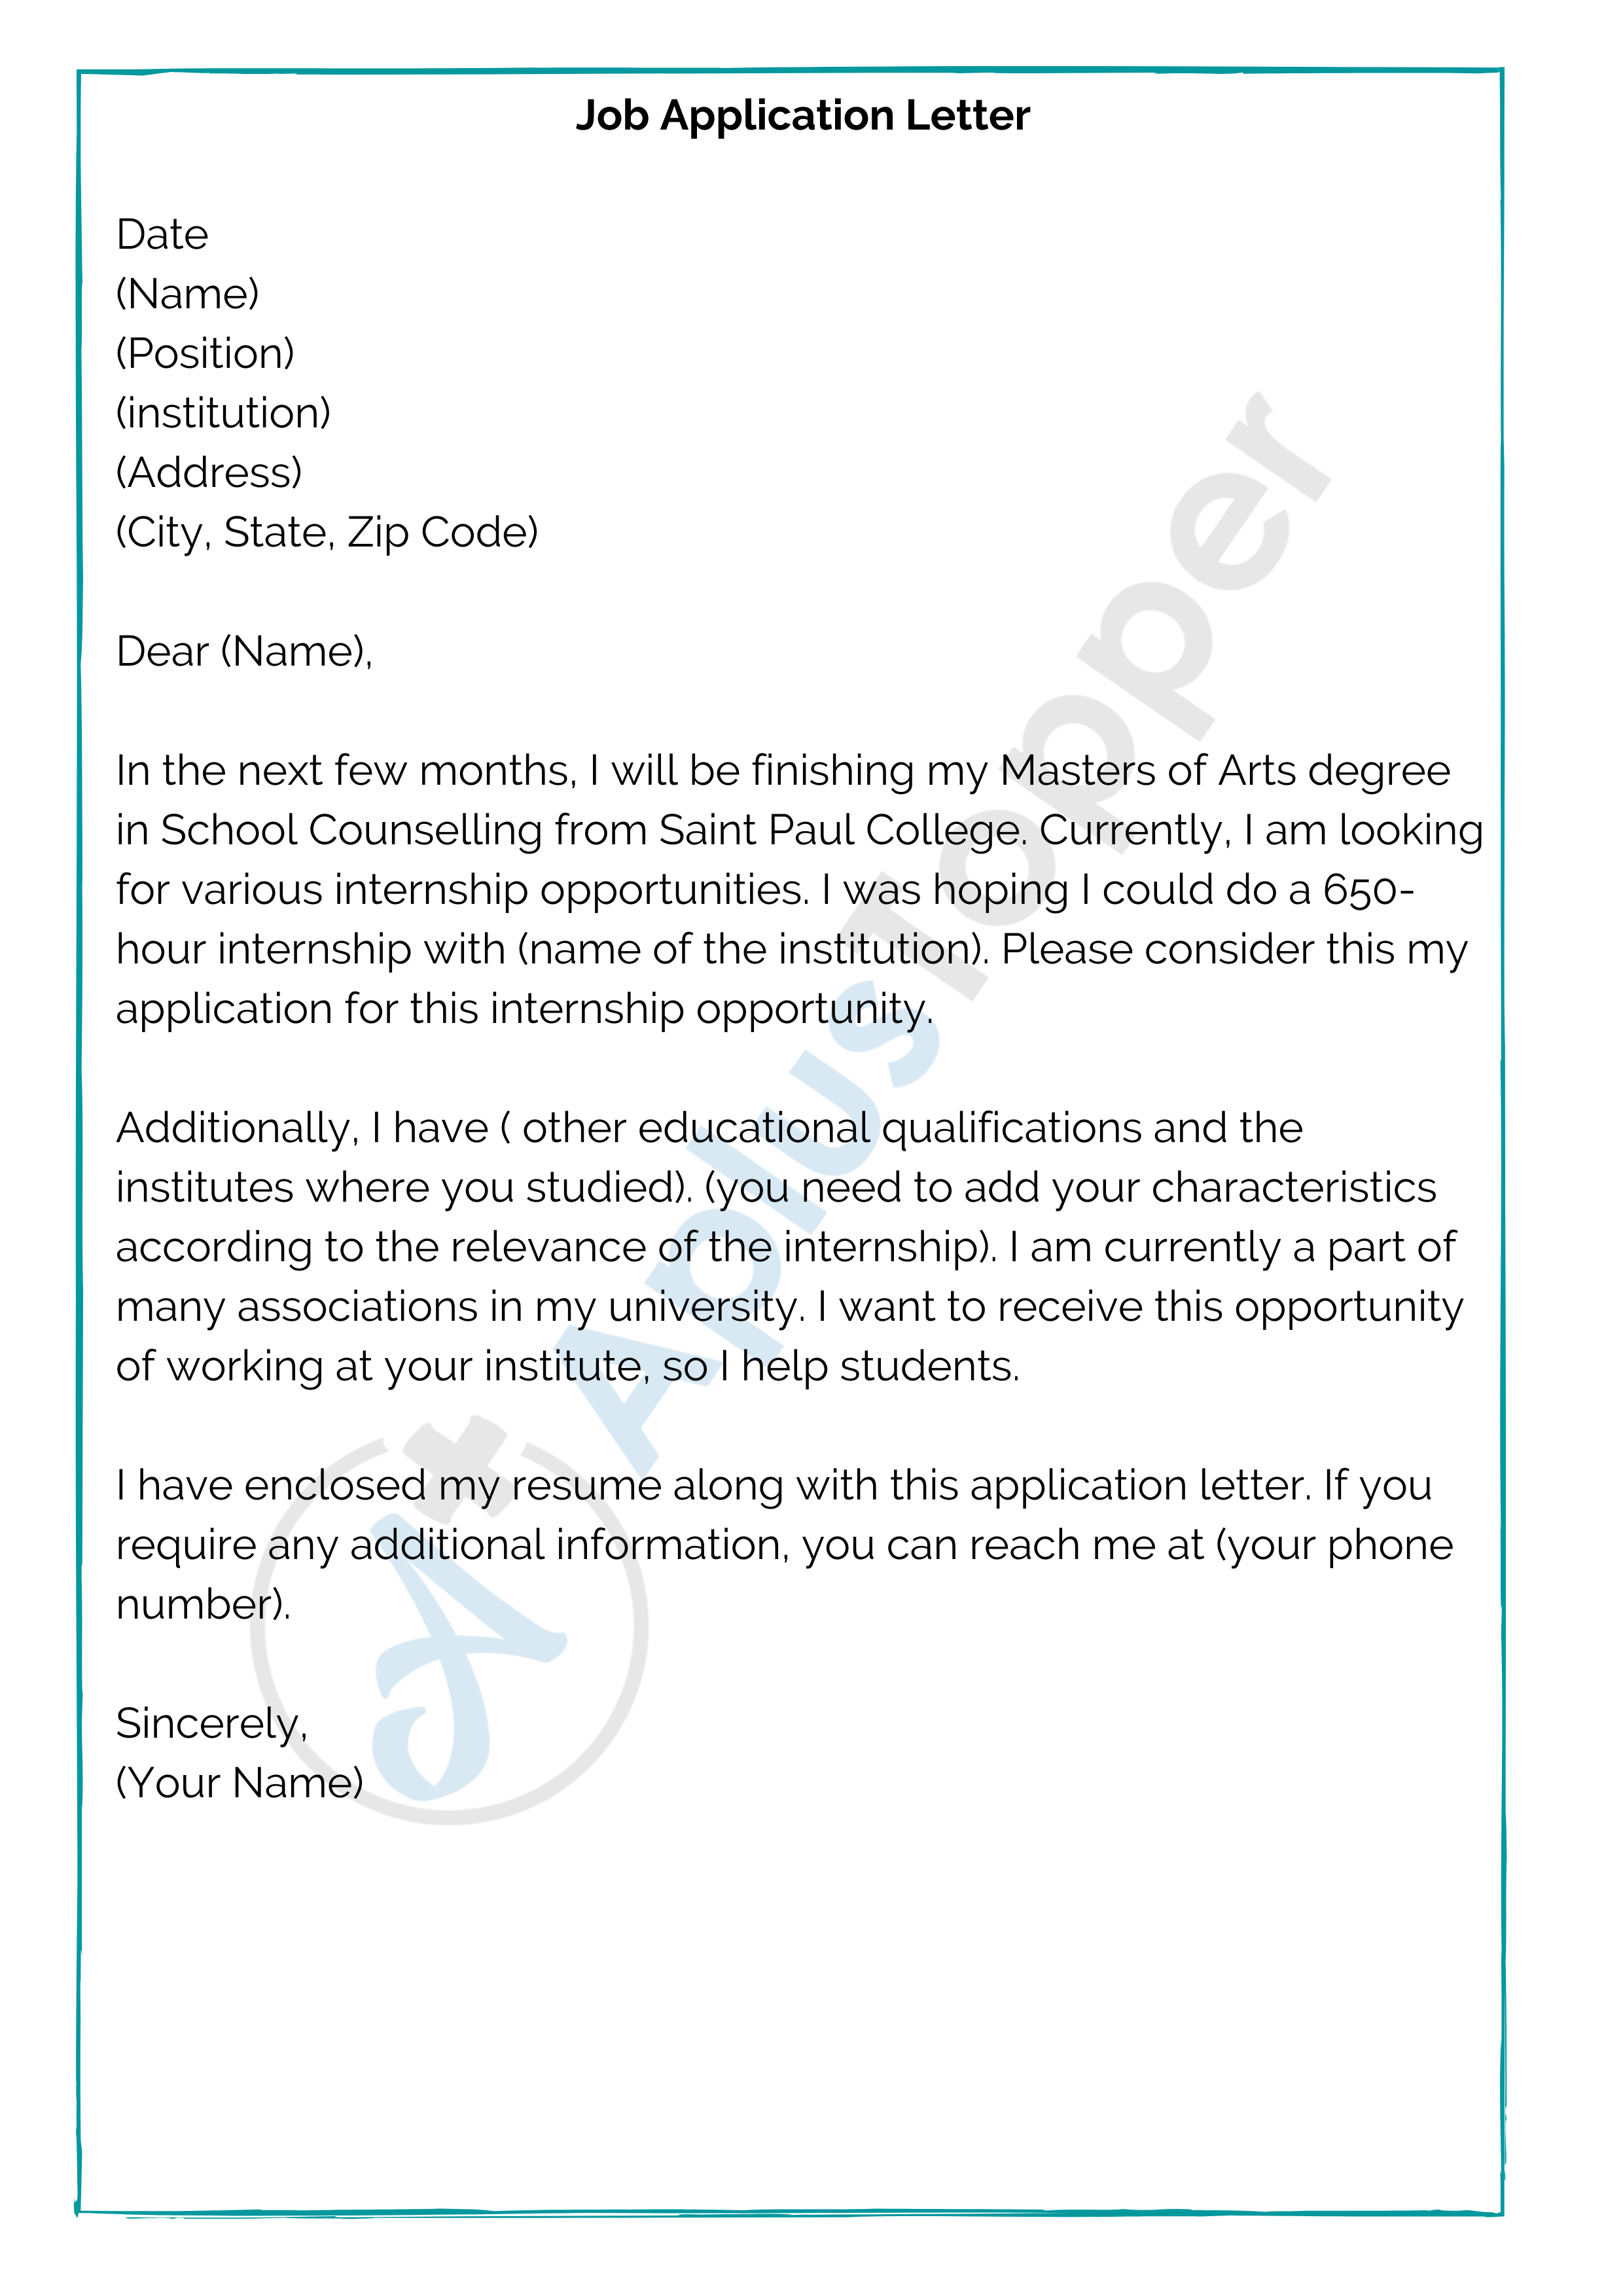 the application letter format